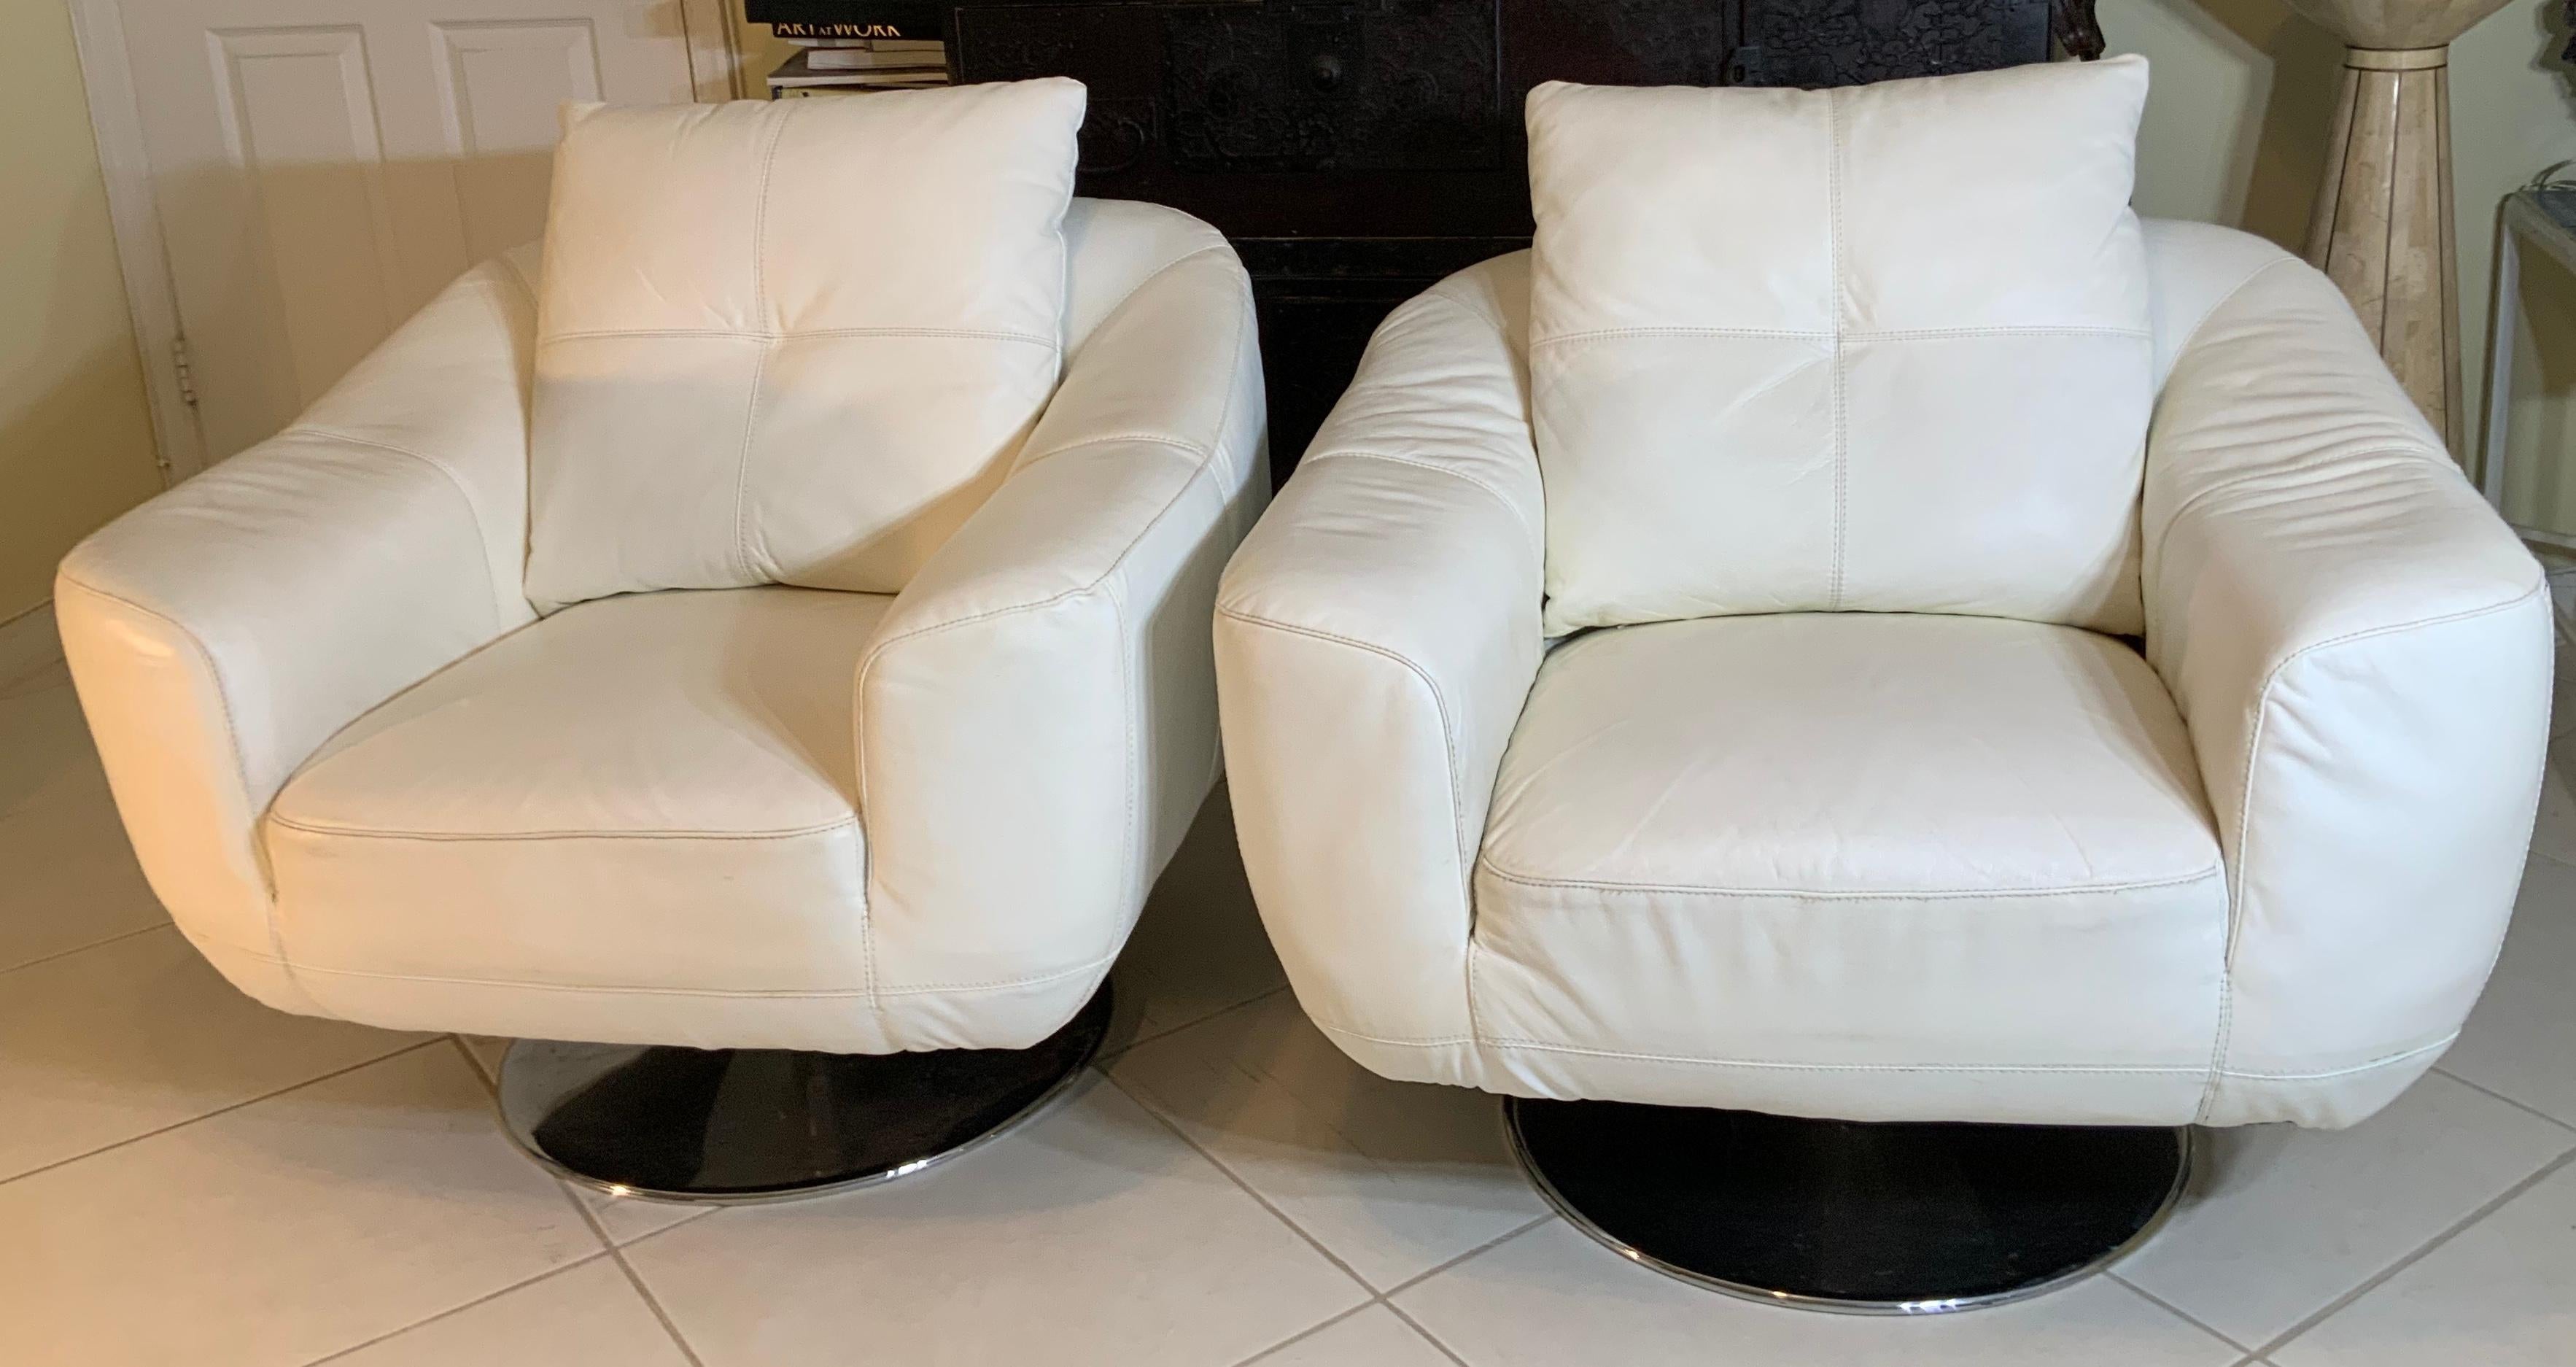 Two vintage modern swivel chairs featuring white faux leather upholstery and round chrome base. Great comfortable to sit and turn, stylish swivel seating adds Mid-Century Modern flare to any interior.

 